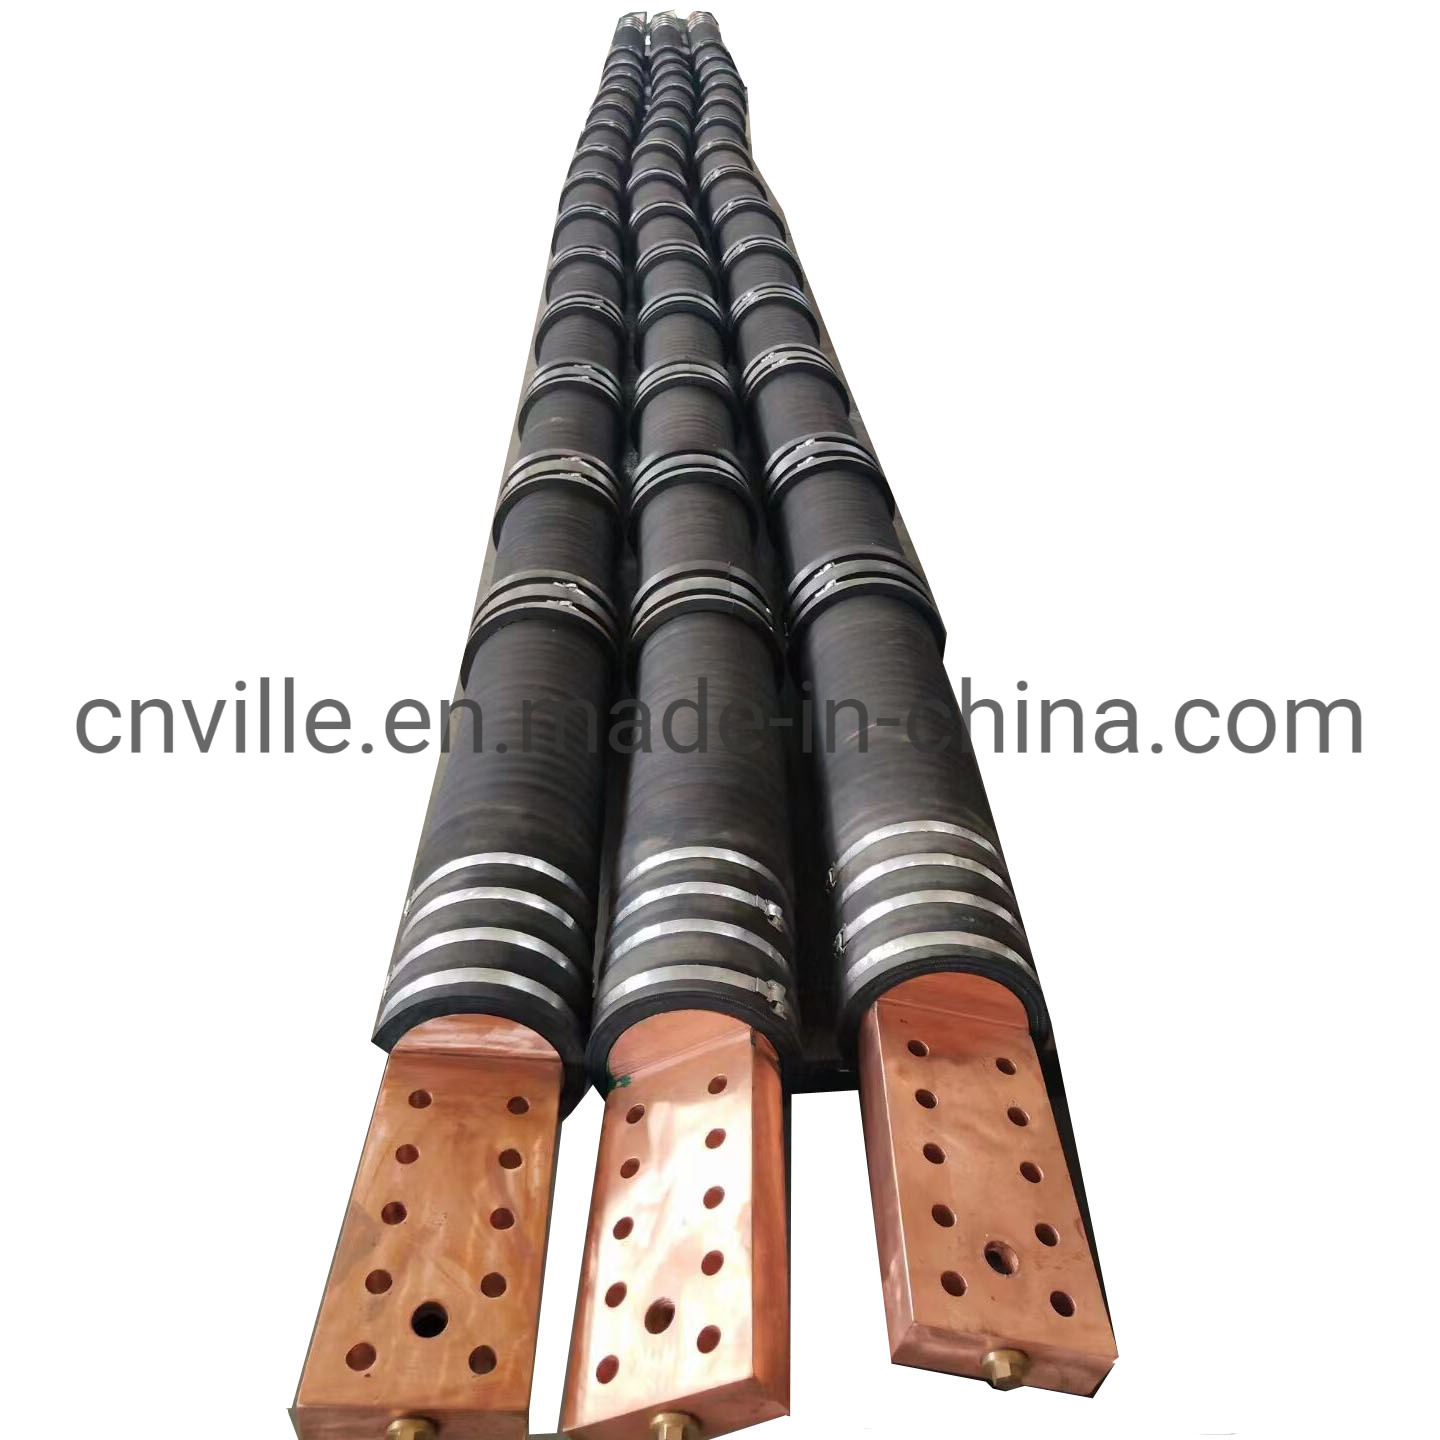 High Current Electric Water-Cooled Rubber Cable